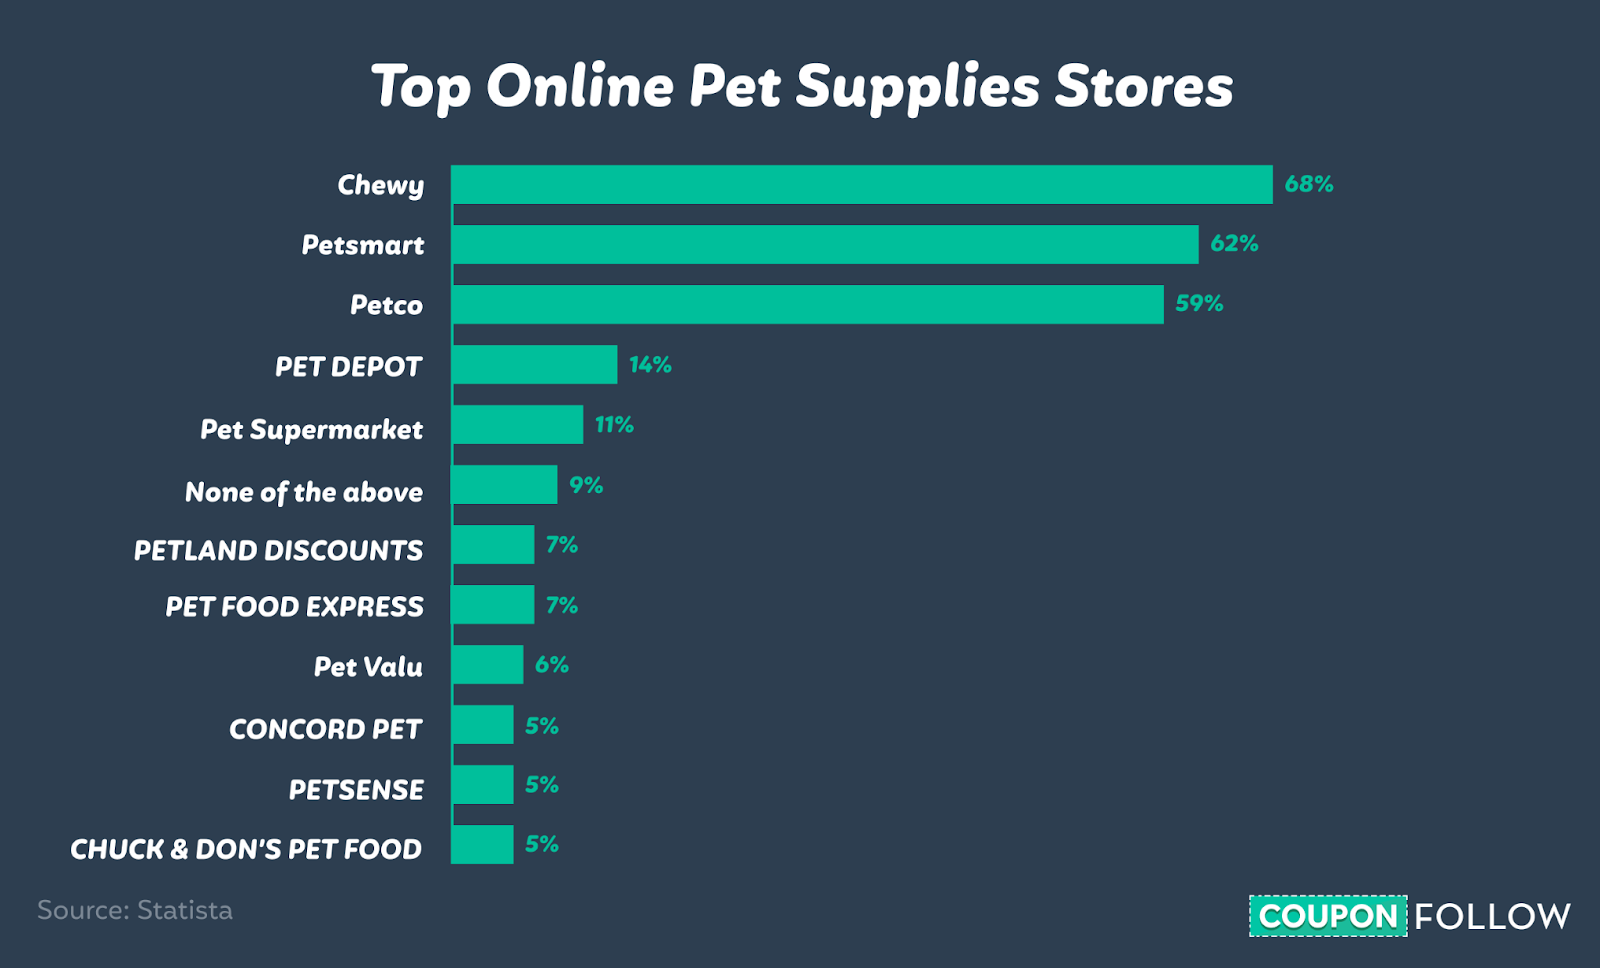 Top online pet supplies stores showing Chewy at the top